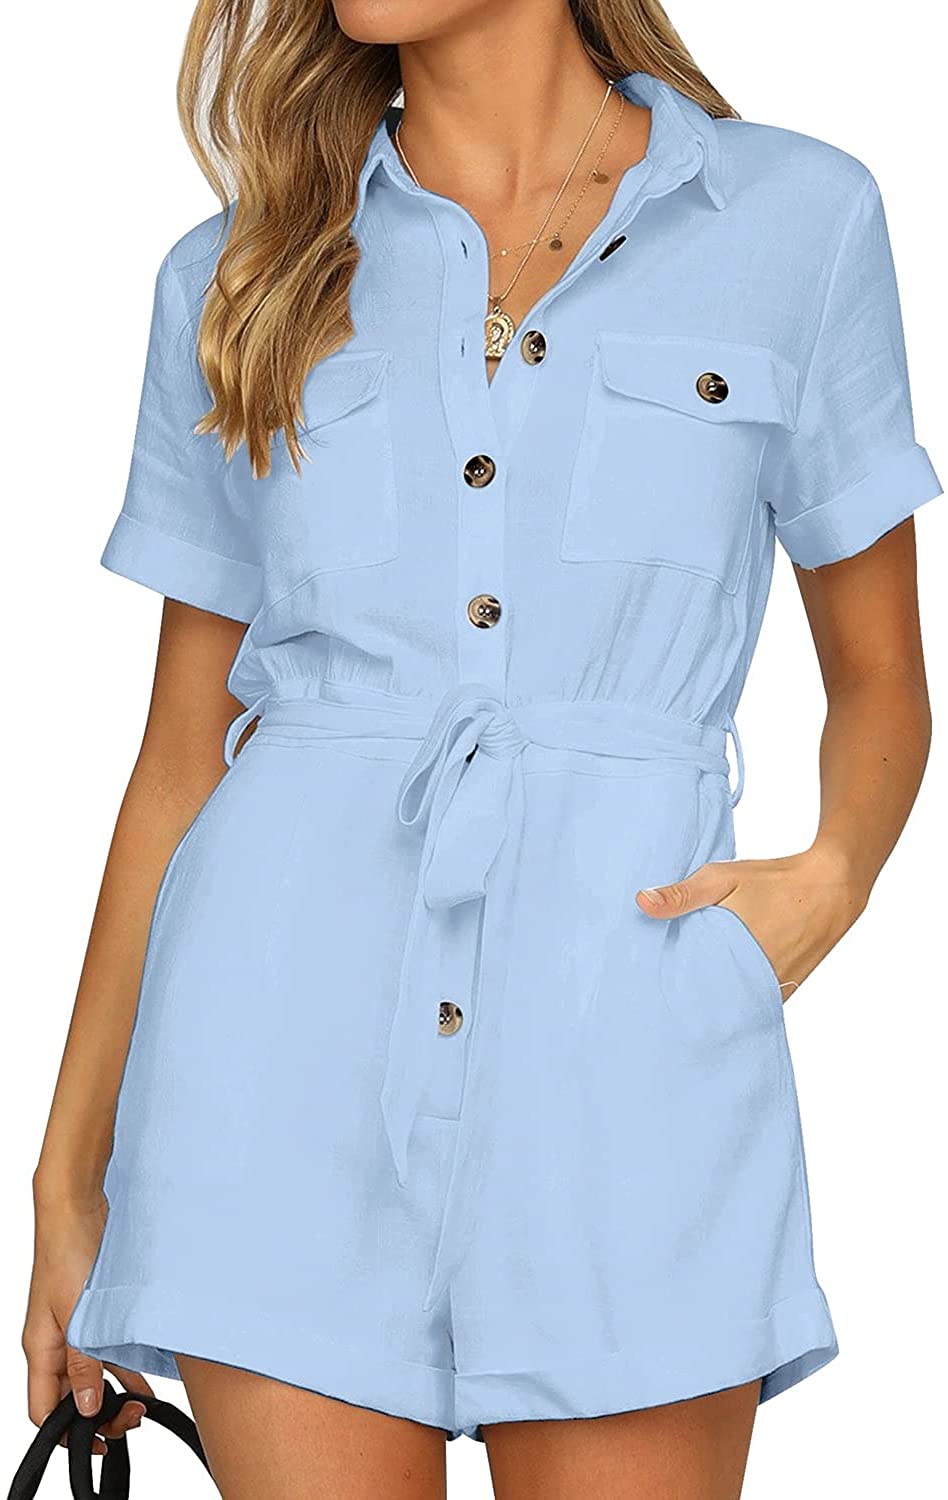 SHIPE Women Button Down Sleeveless Rompers V Neck Short Jumpsuit Rompers Playsuit with Pockets 